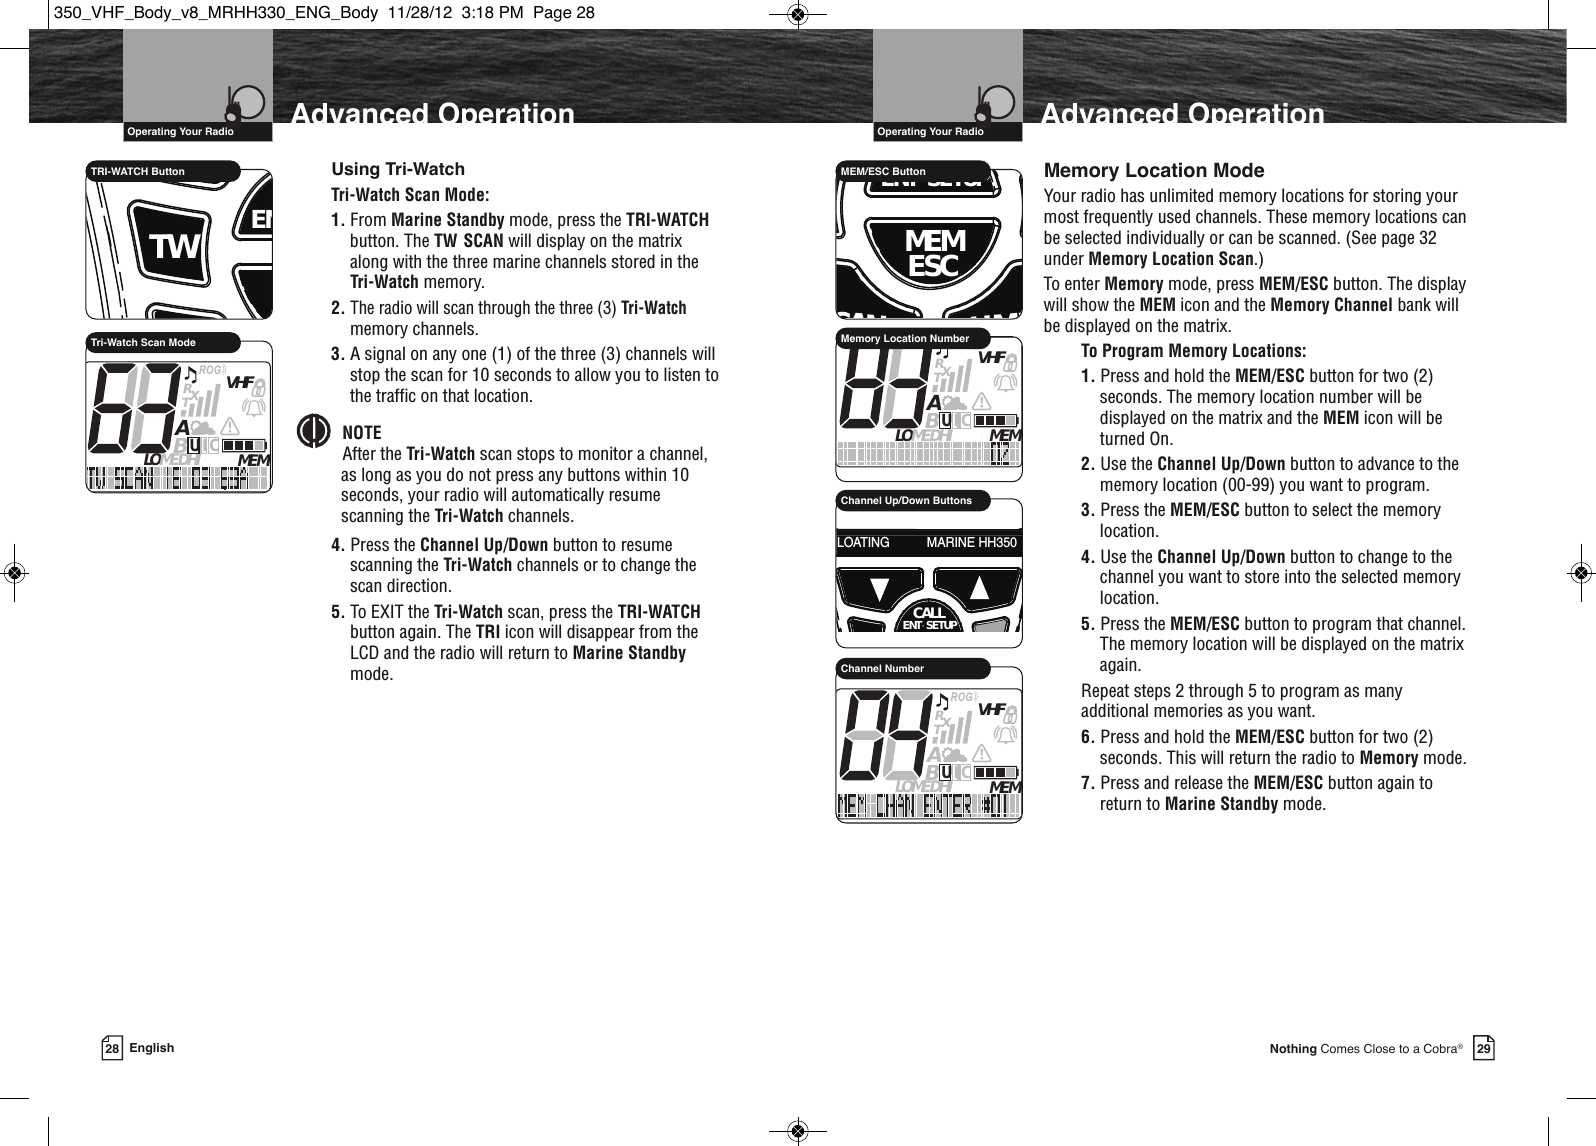 Page 17 of Cobra Electronics MRHH350 MARINE TRANSCEIVER User Manual MRHH330 ENG Body